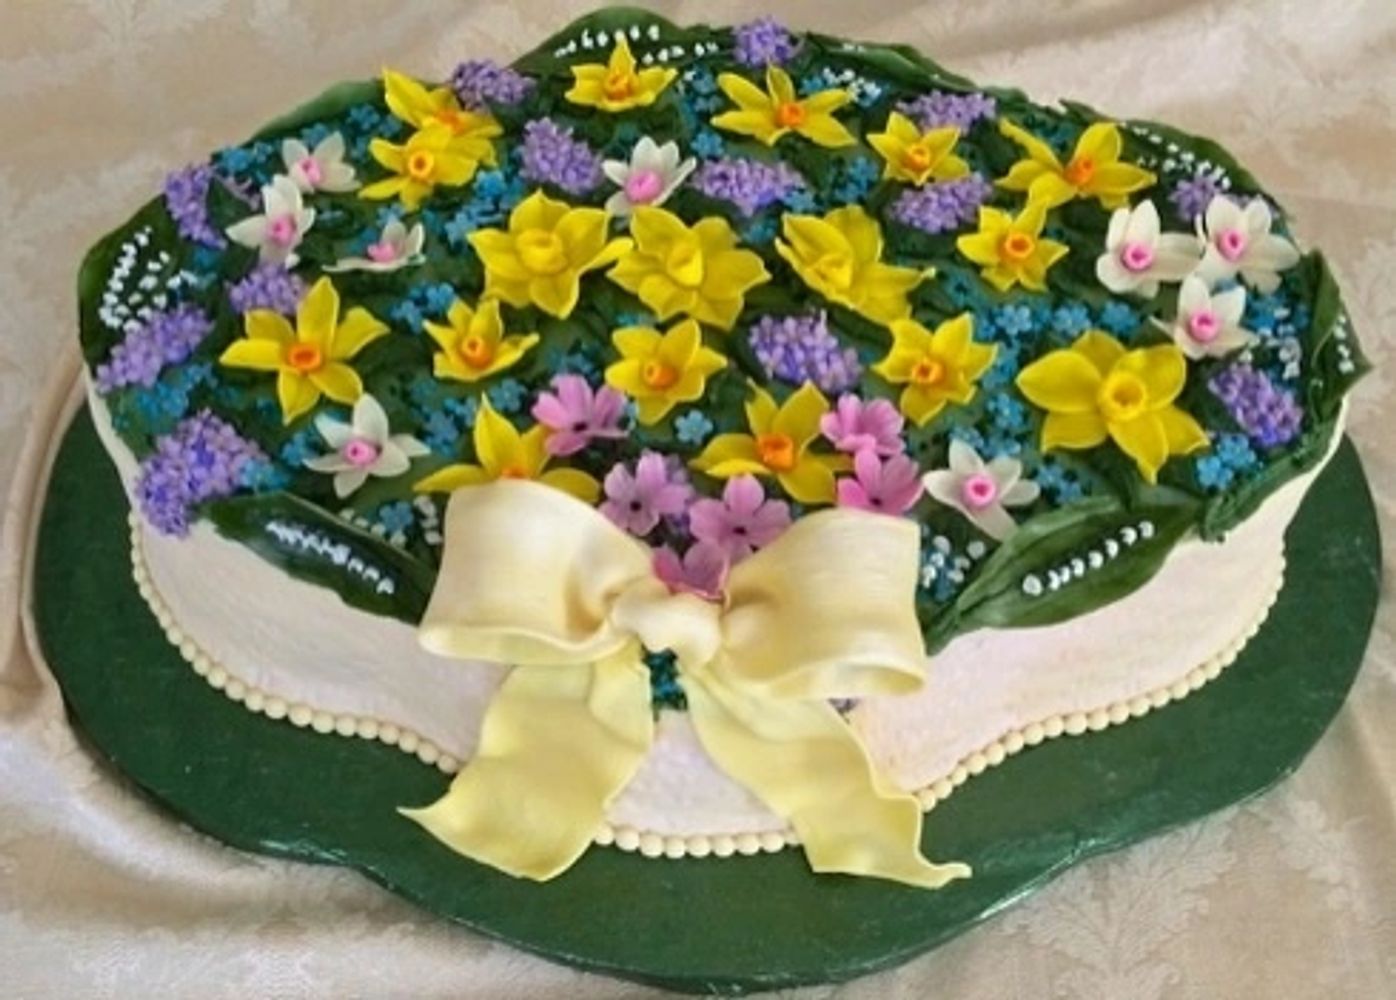 This custom designed cake has Spring buttercream and fondant flowers and adorned with a fondant bow.